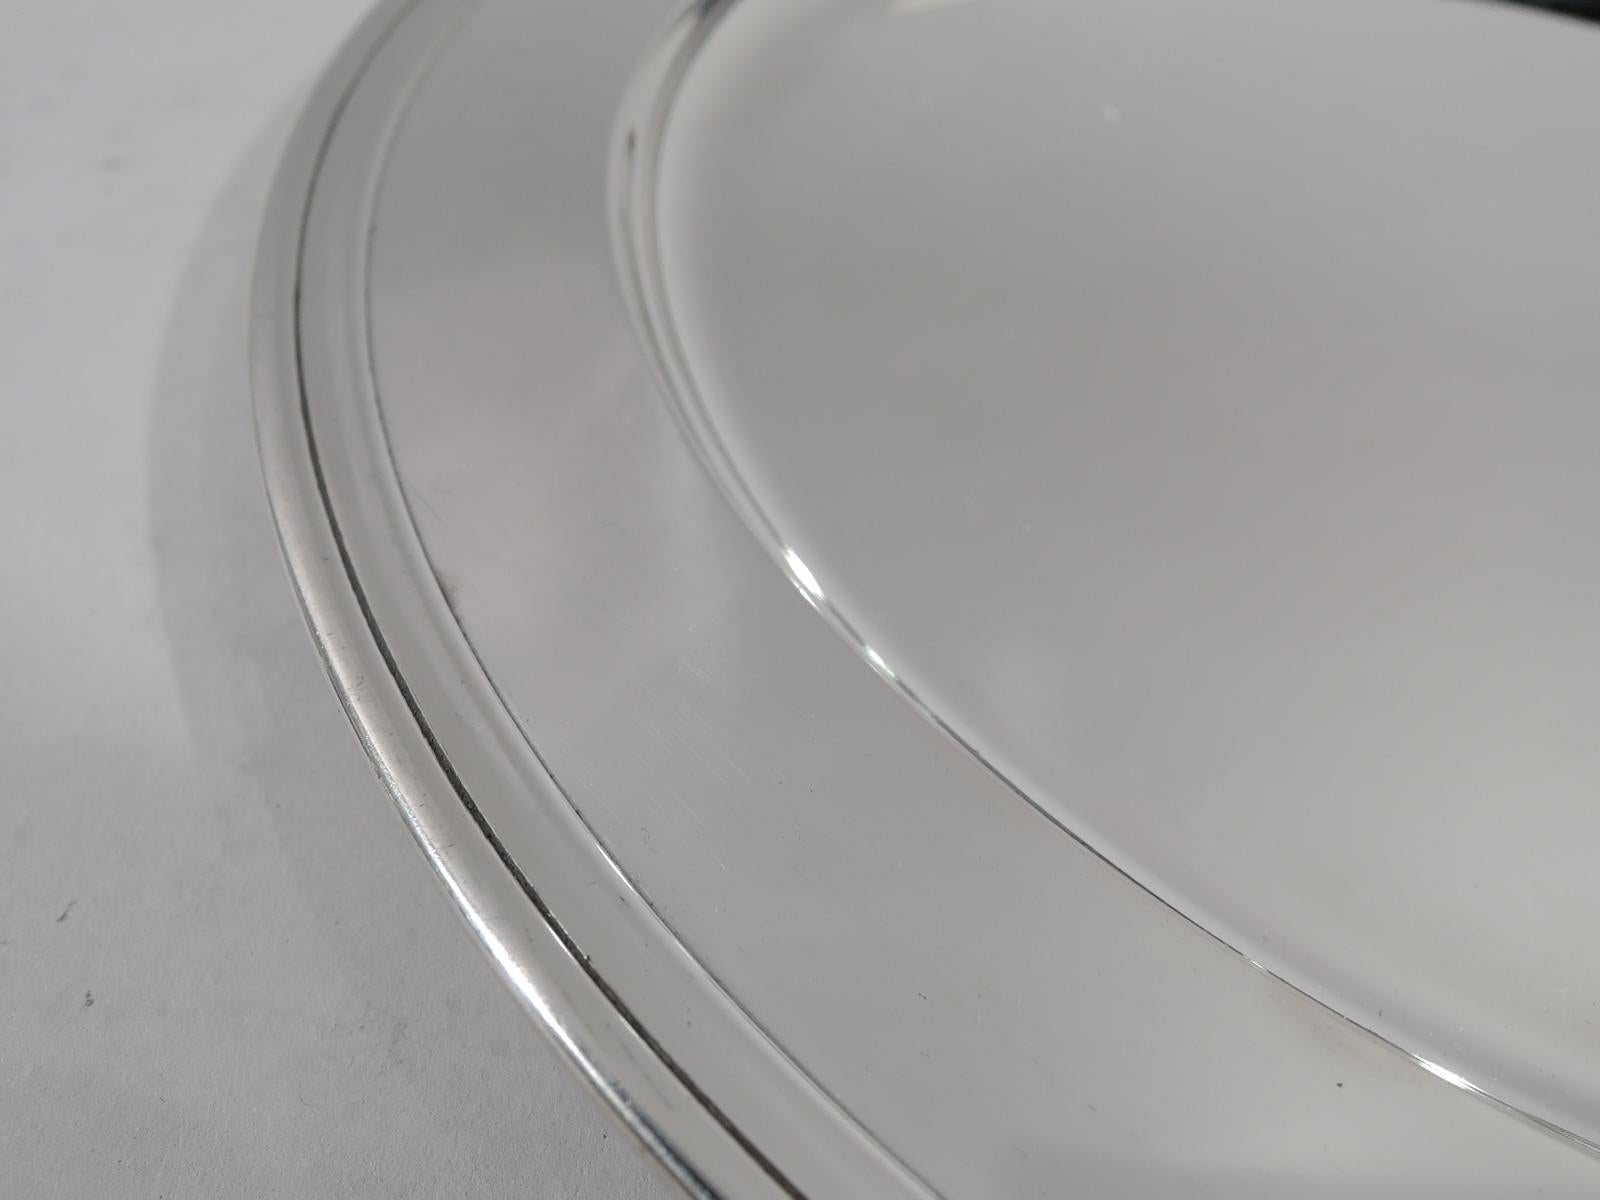 Modern sterling silver serving tray. Made by Tiffany & Co. in New York, circa 1923. Round with well and molded rim. Fully marked including pattern no. 20185 (first produced in 1923), director’s letter m, and diameter. Weight: 15.5 troy ounces.